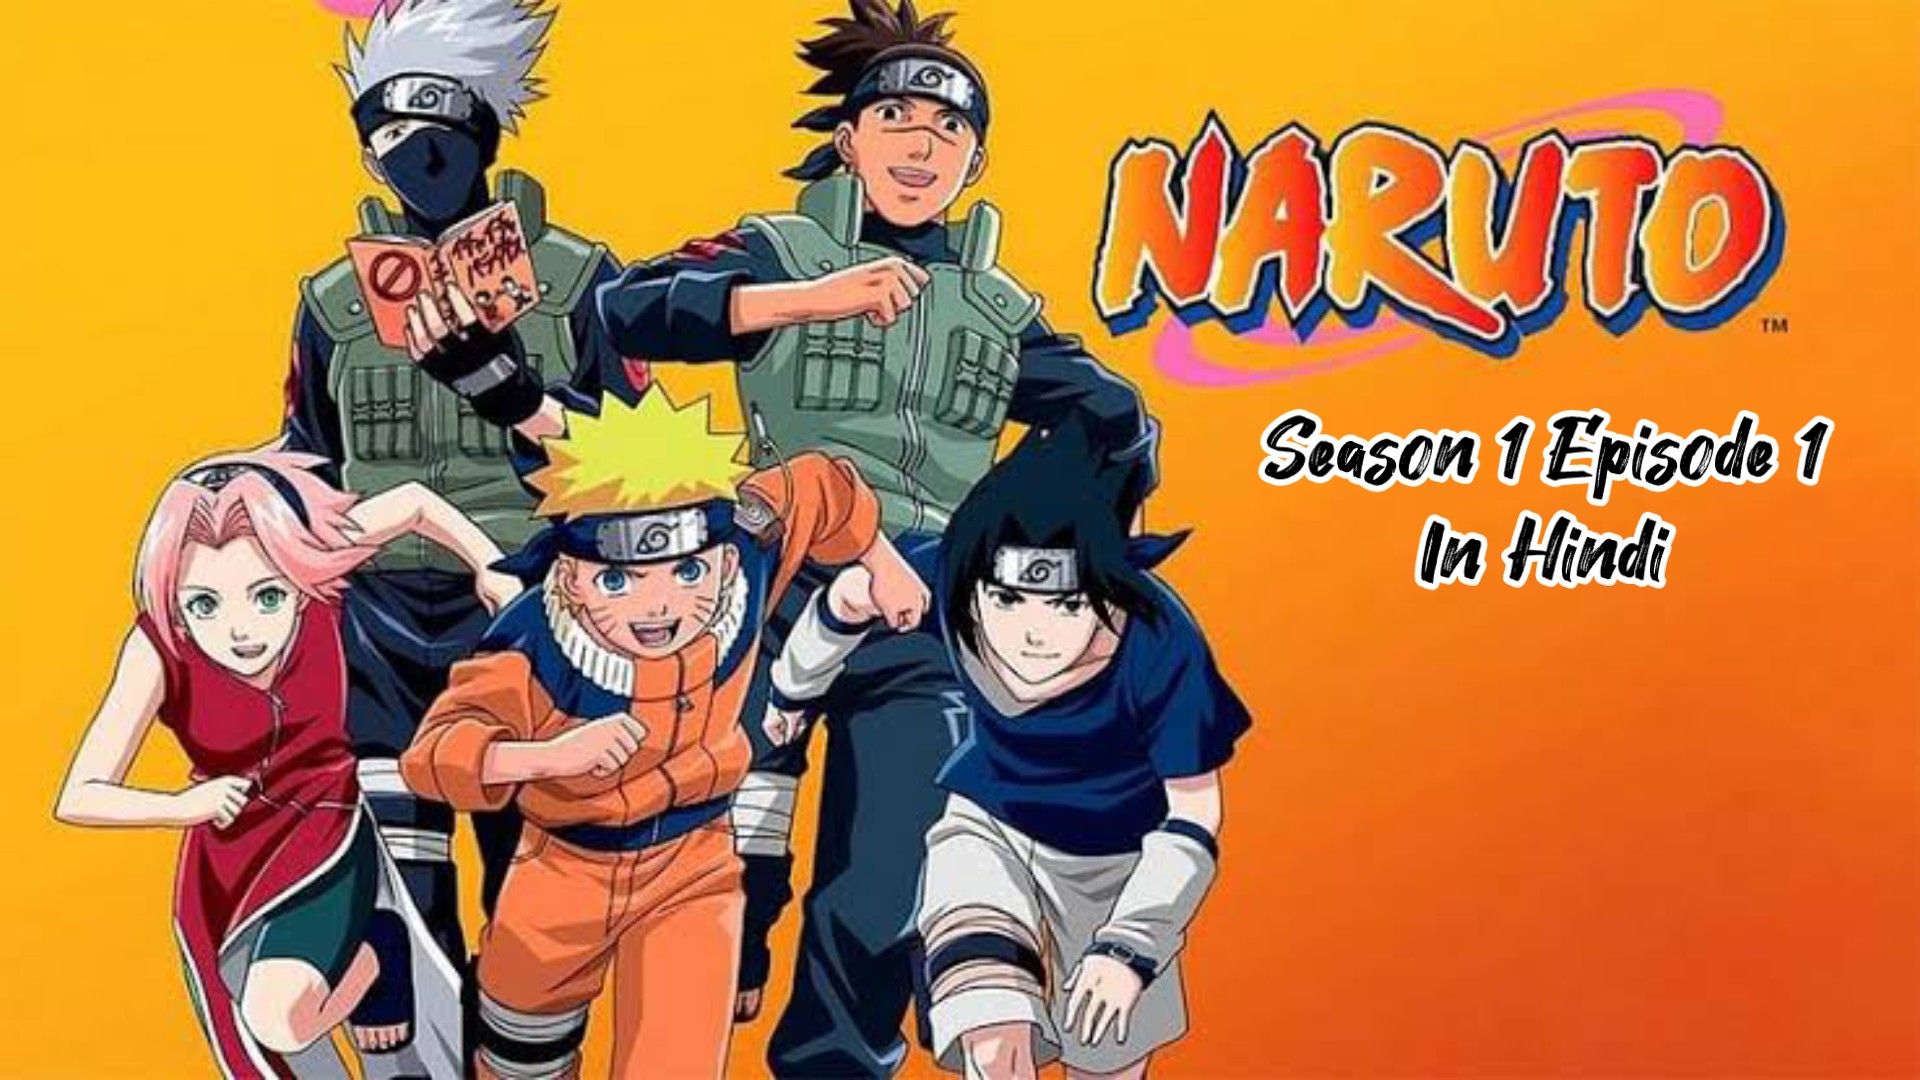 Naruto shippuden episode 1 in hindi, explain by, anime explanation in  2023